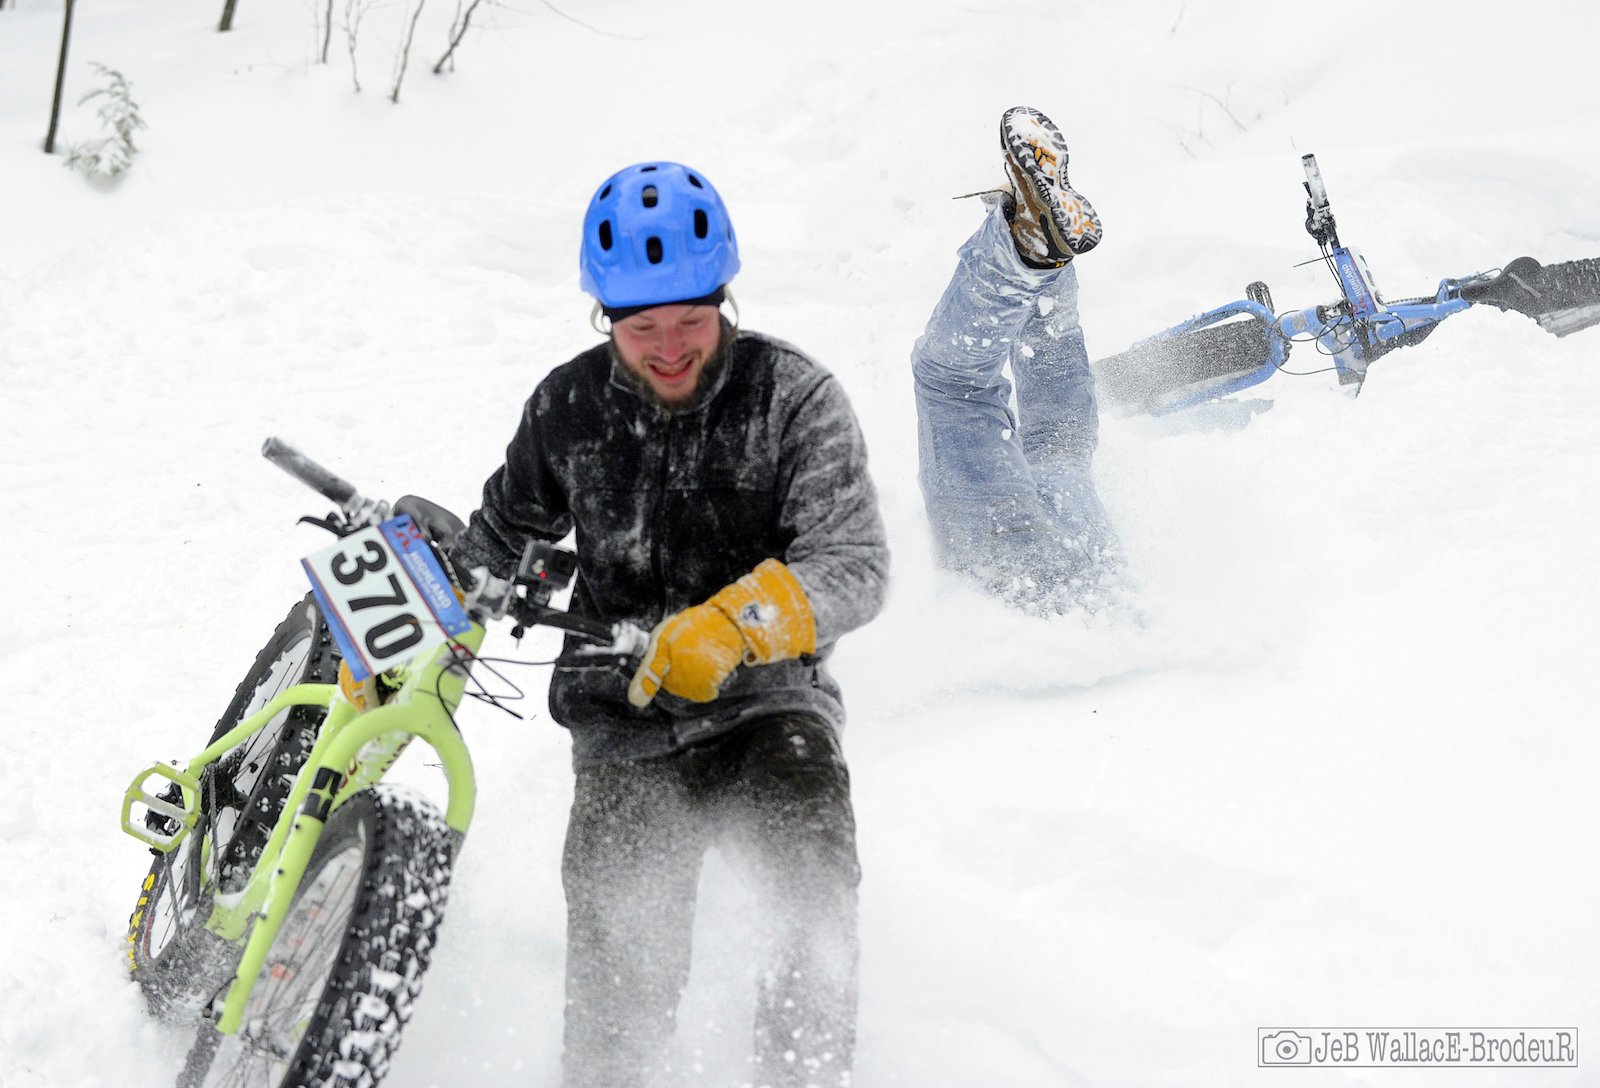 Some racers didn't fare as well as others 
Photo: Jeb Wallace-Brodeur